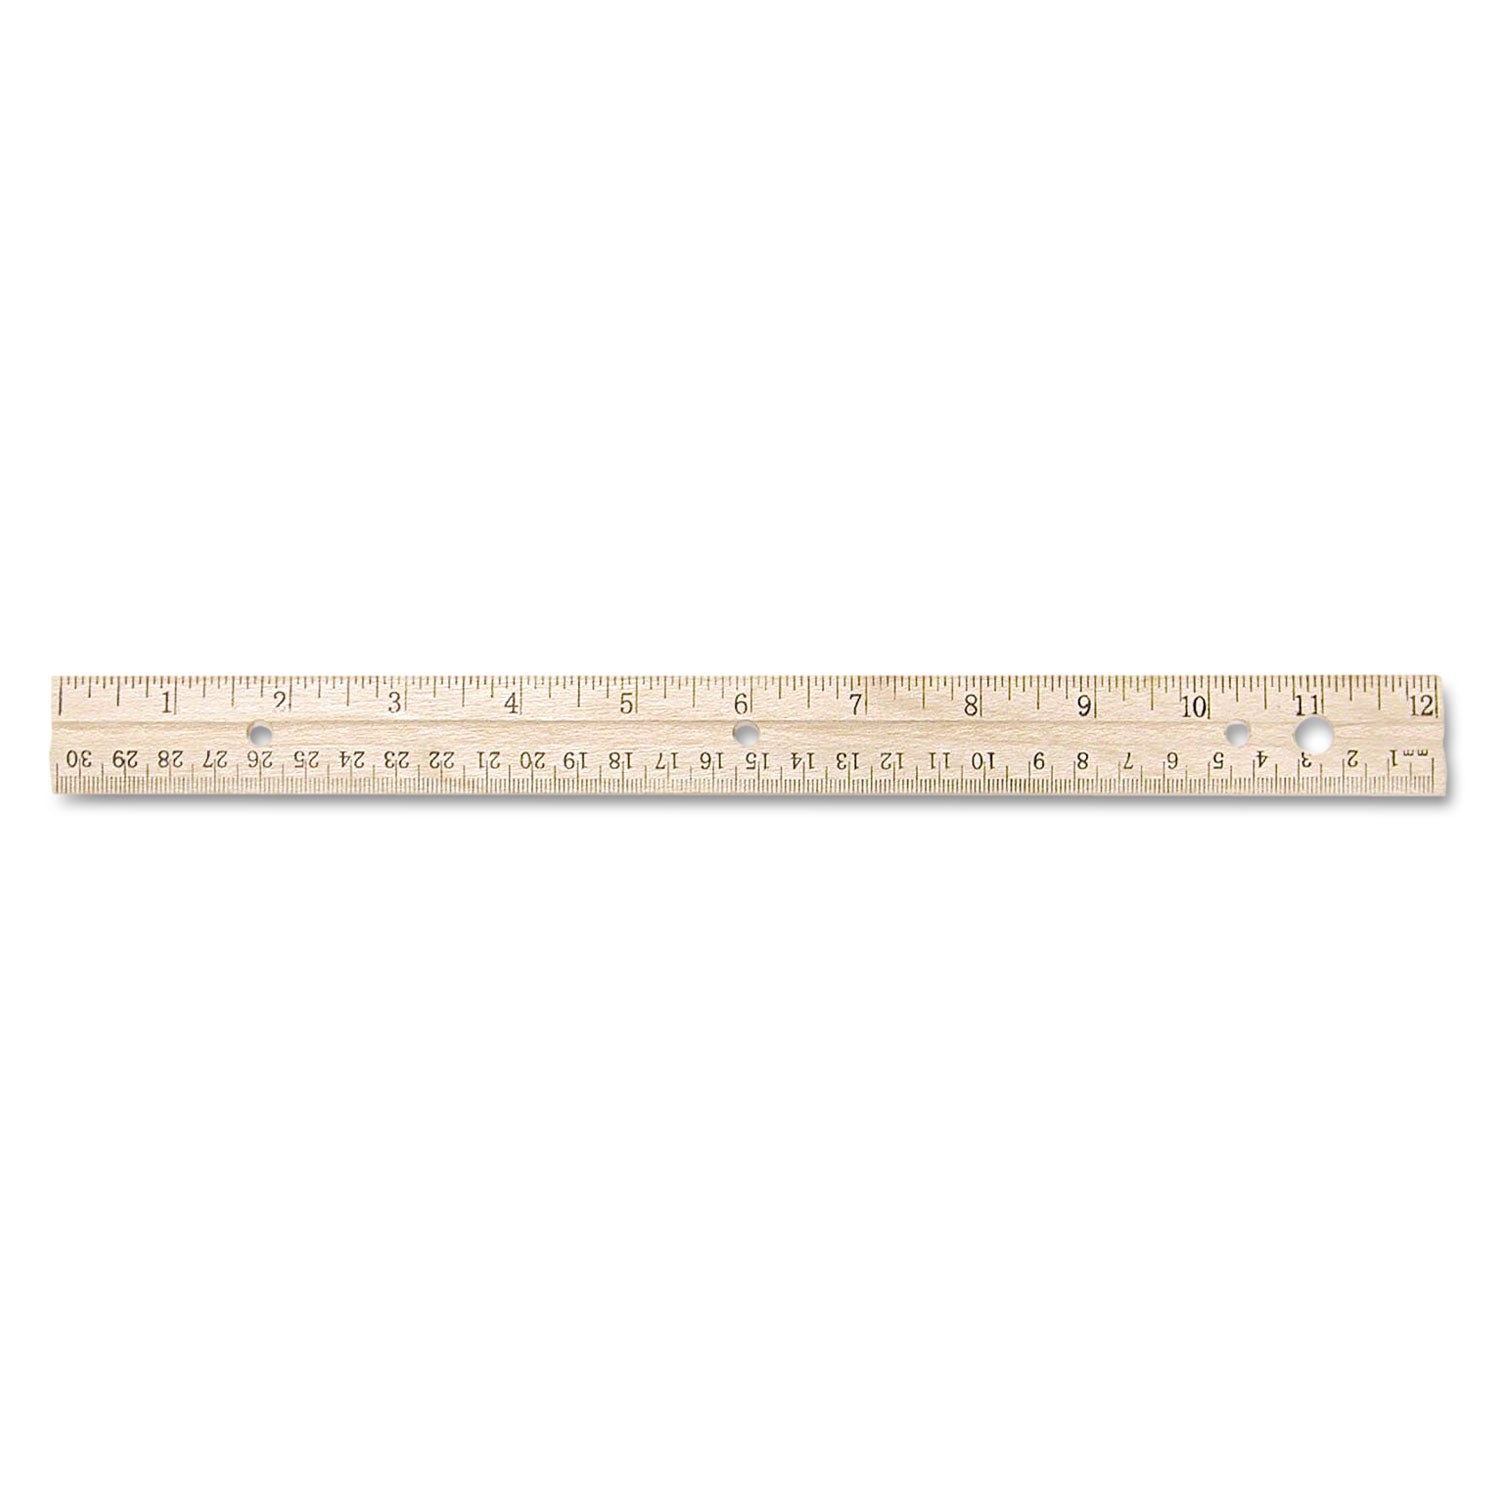 Three-Hole Punched Wood Ruler English and Metric With Metal Edge, 12" Long - 